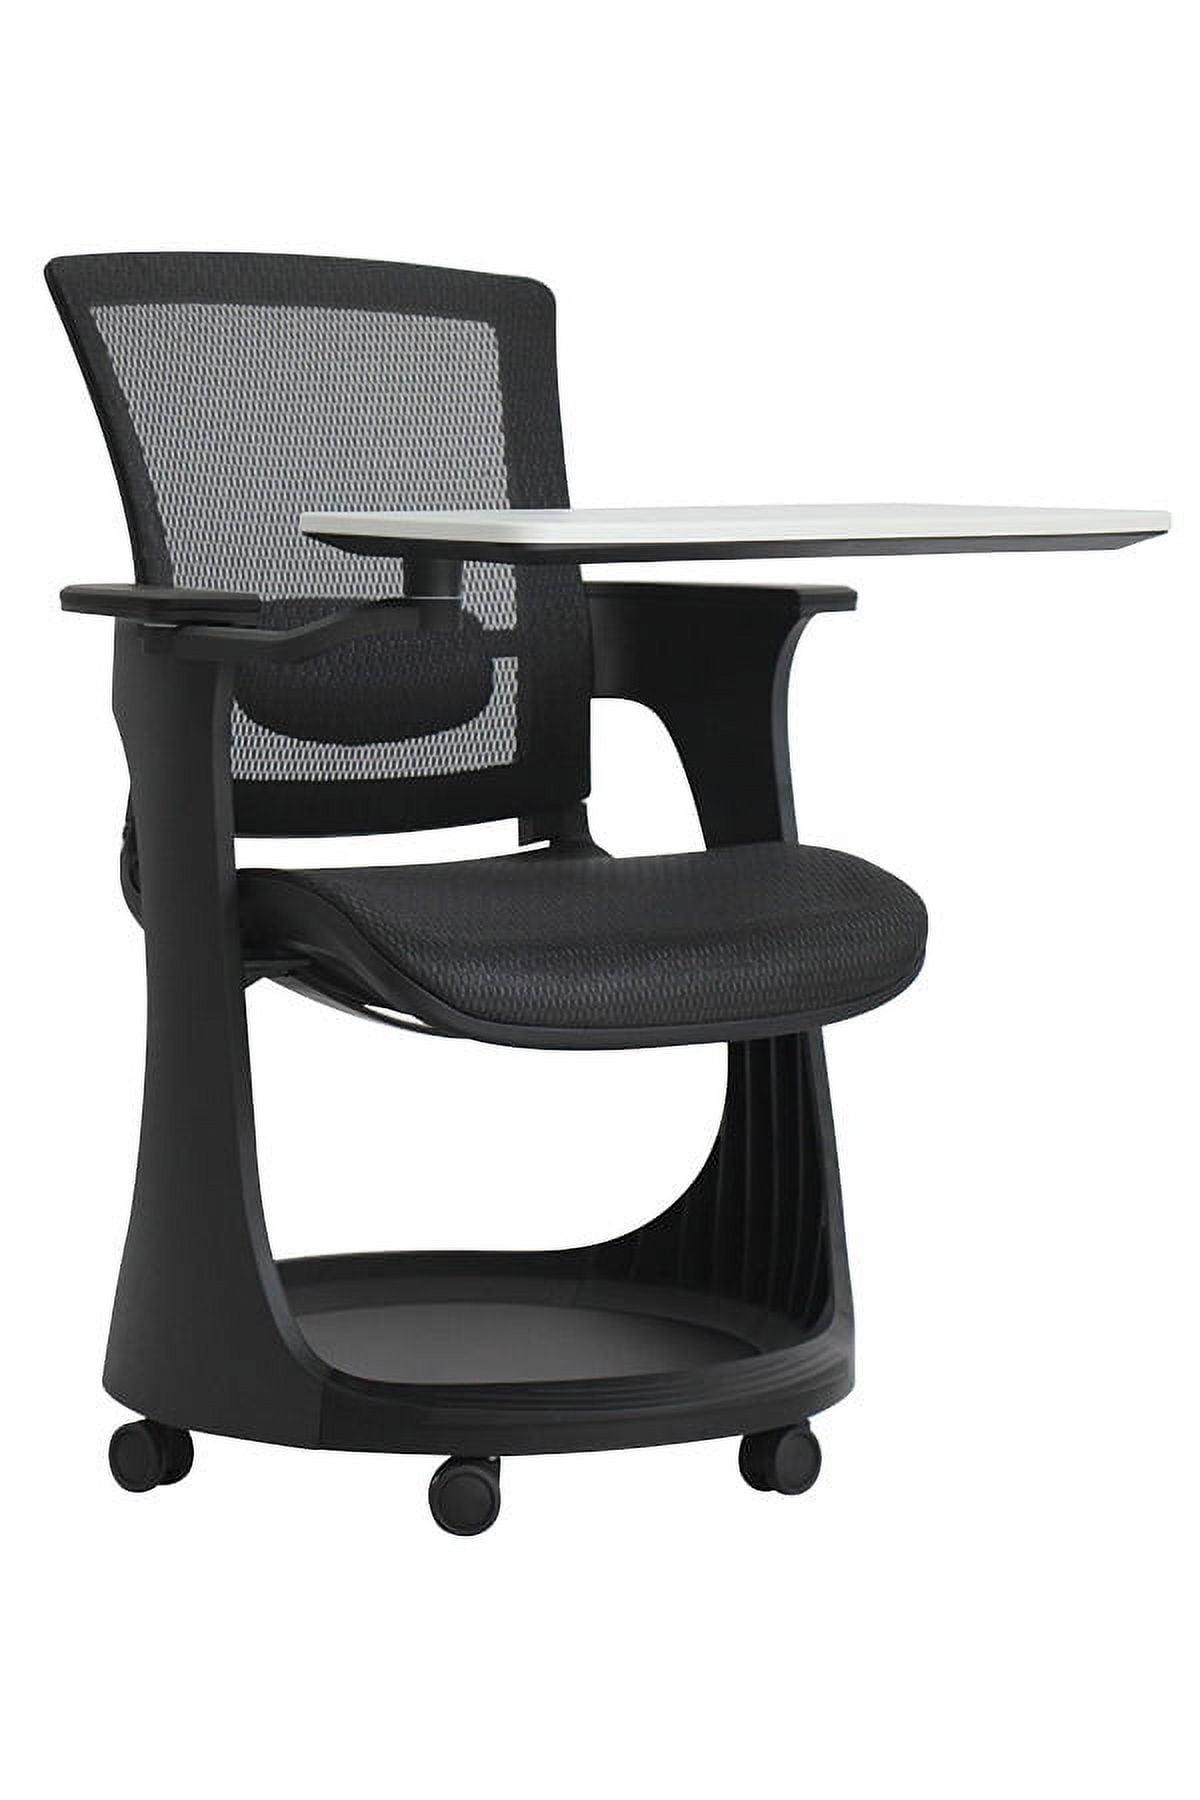 Eurotech Eduskate Black Mesh Personal Workspace Chair with Tablet Arm